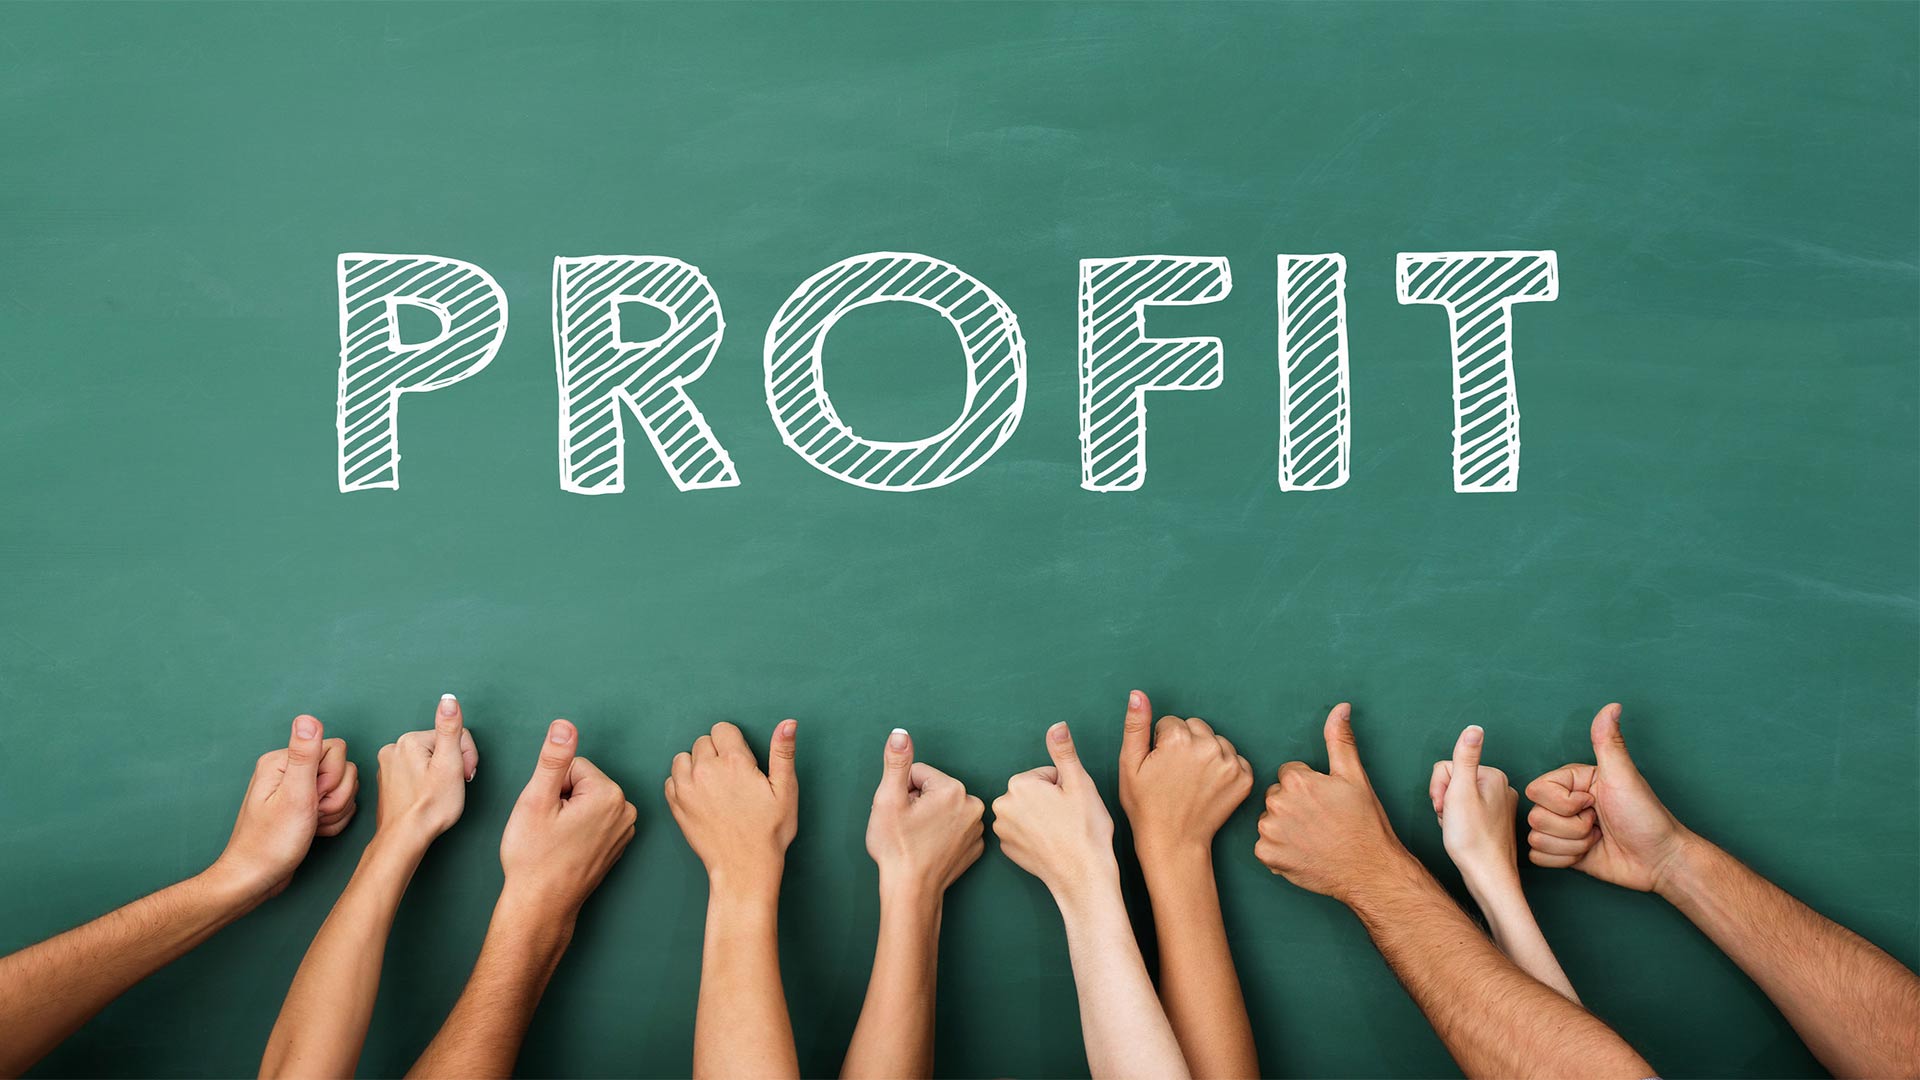 Increase profits for small business